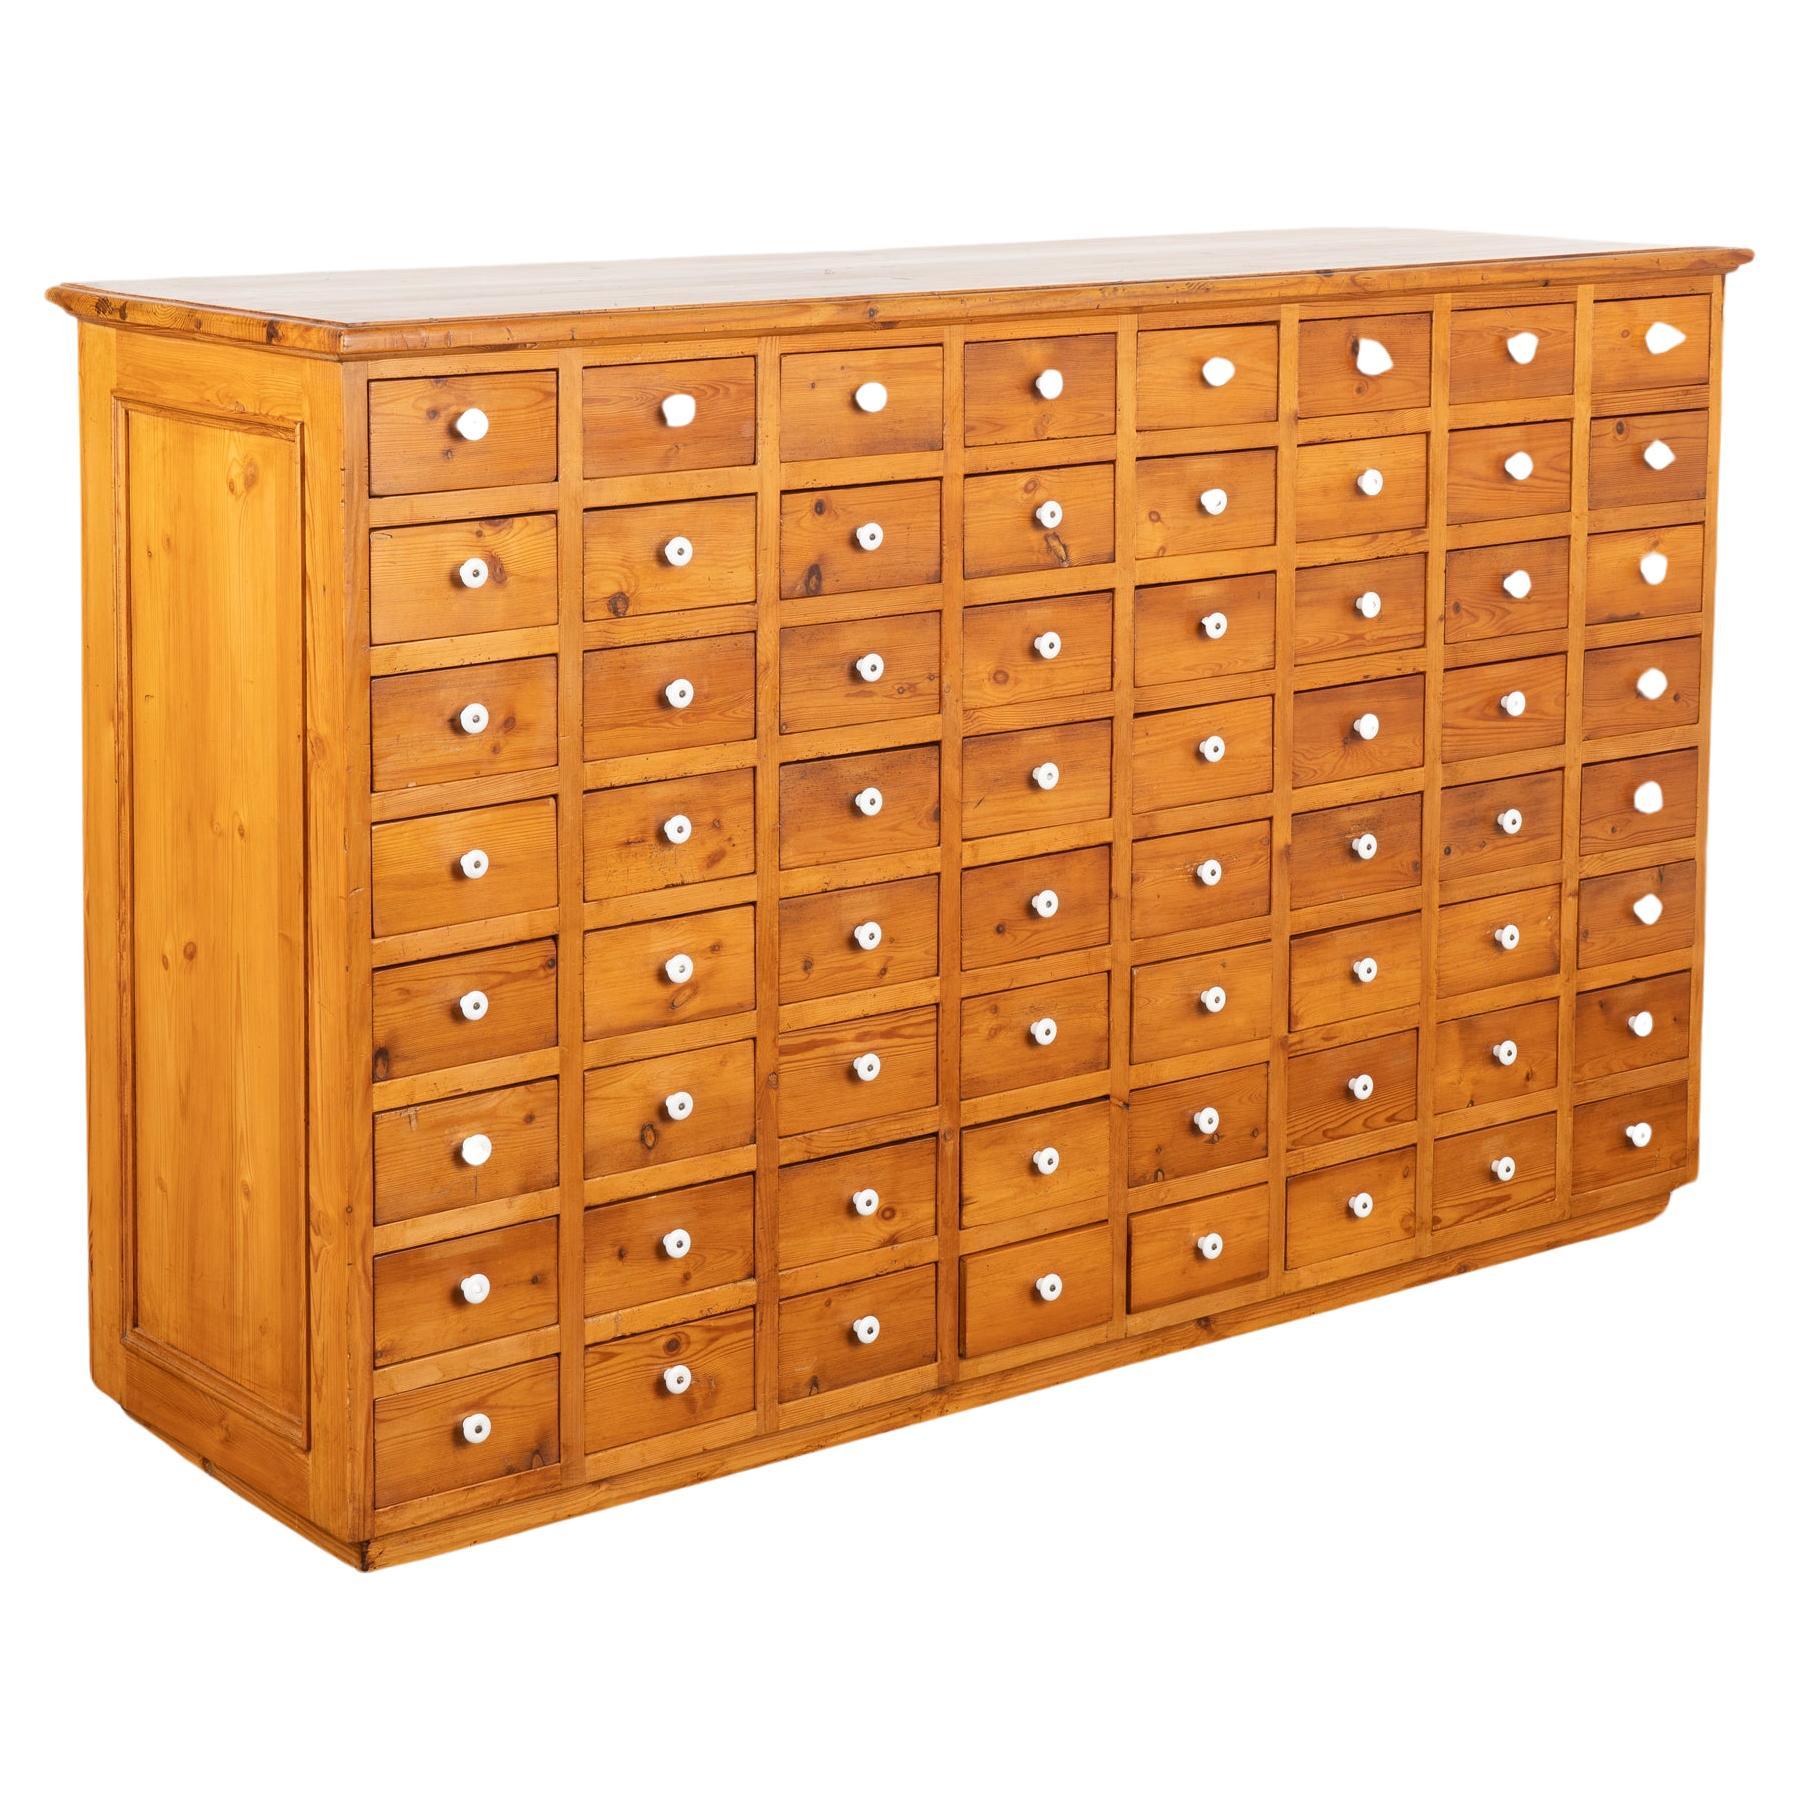 Free Standing Pine Apothecary Counter with 64 Drawers, Kitchen Island circa 1900 For Sale